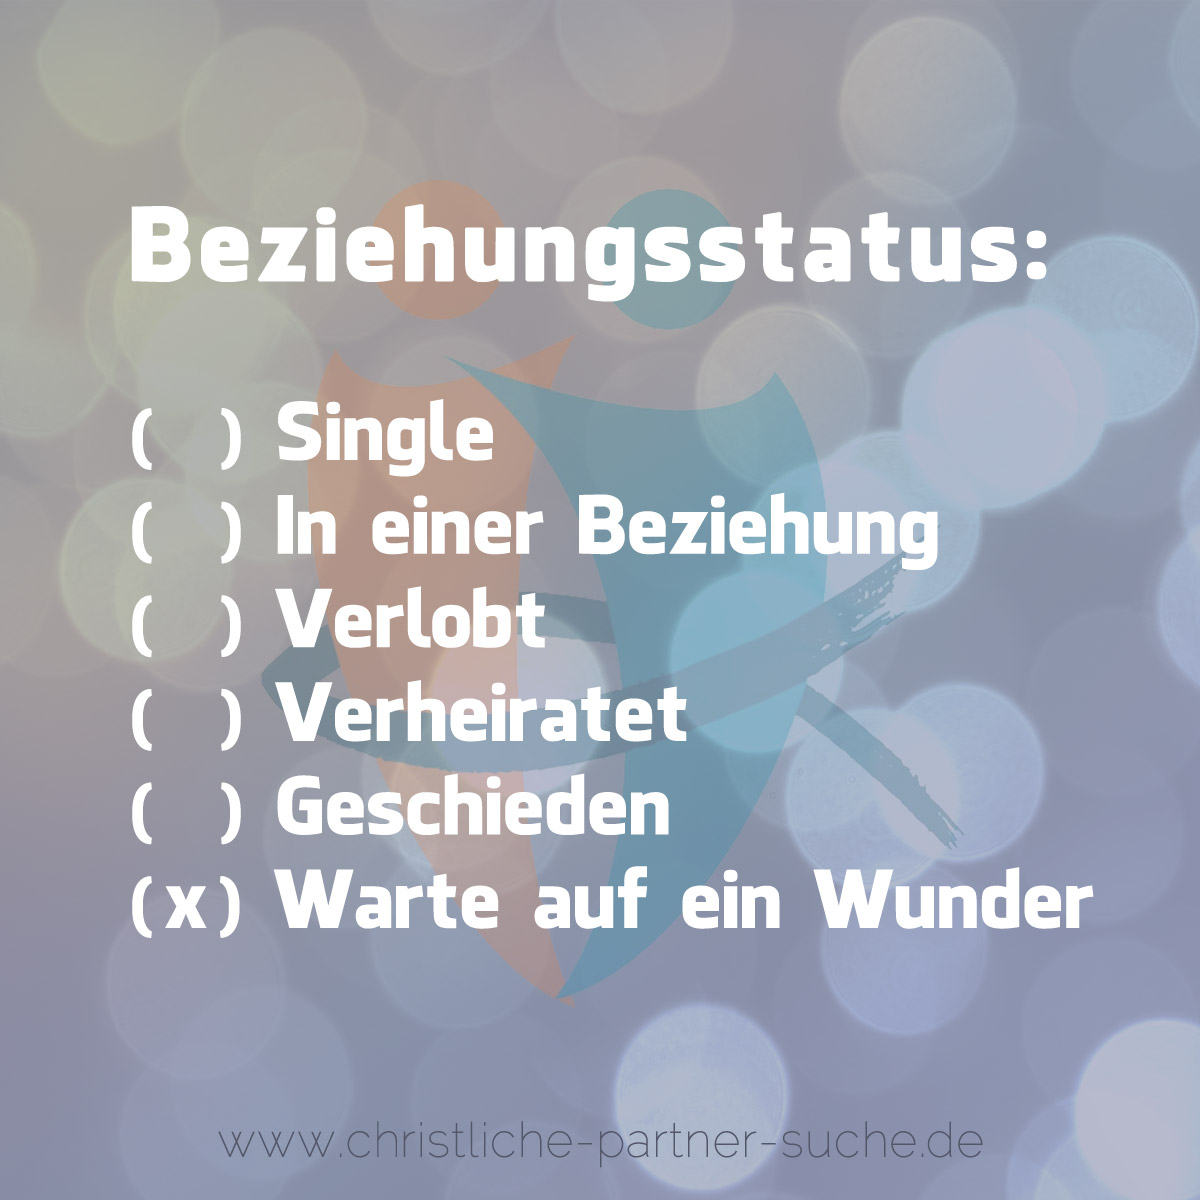 Single des tages for you